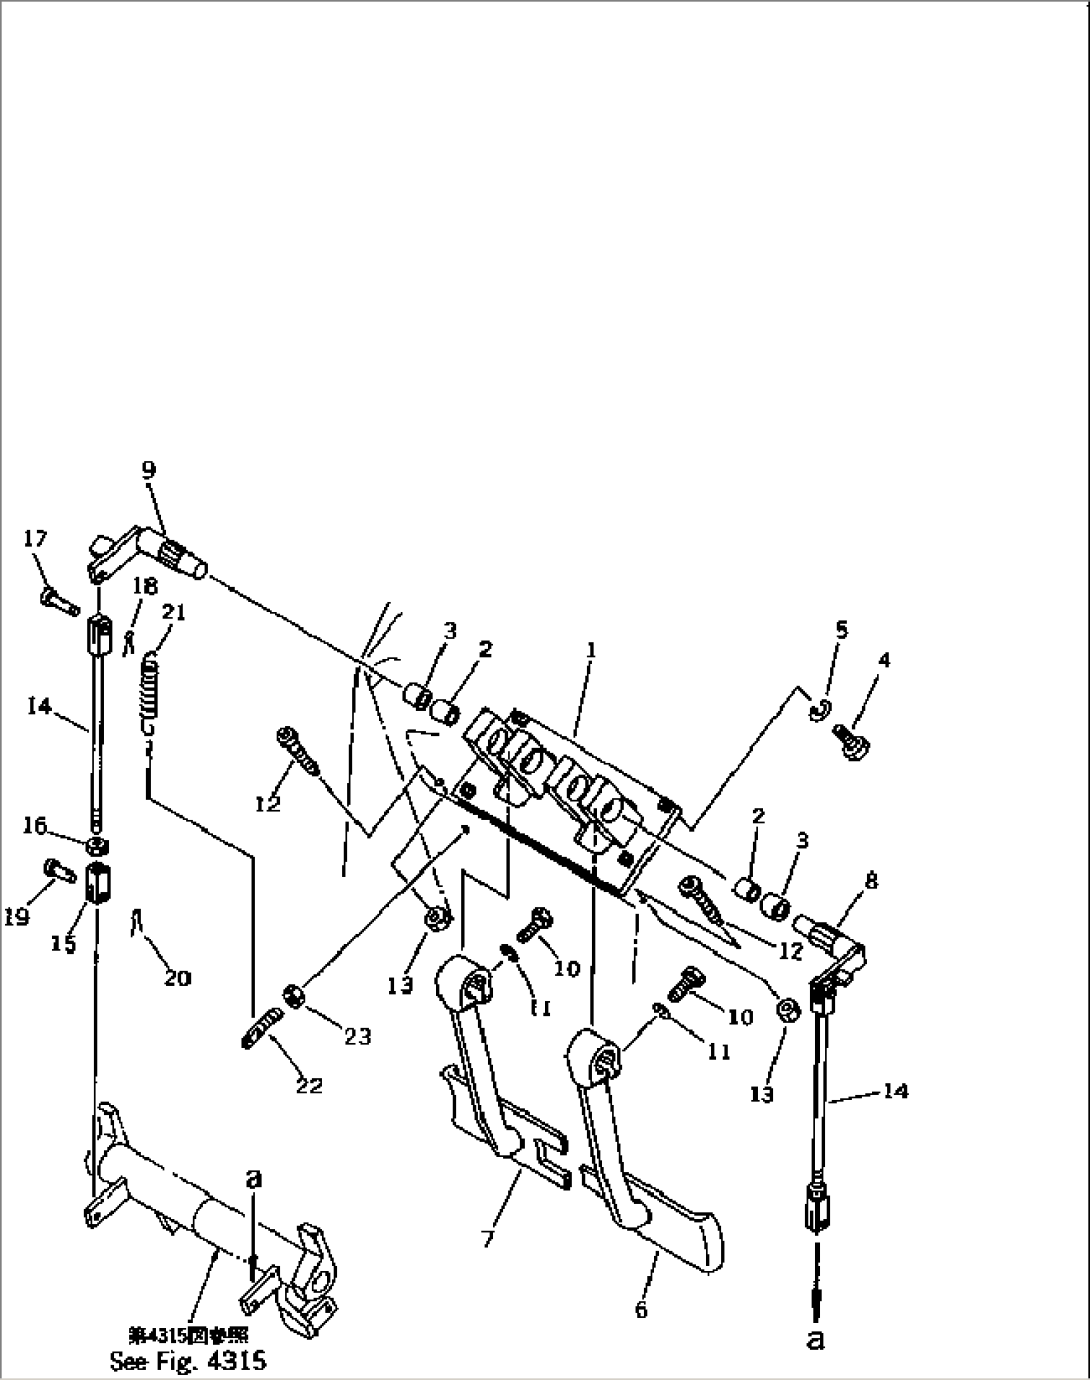 STEERING AND BRAKE PEDAL (FOR PEDAL STEERING)